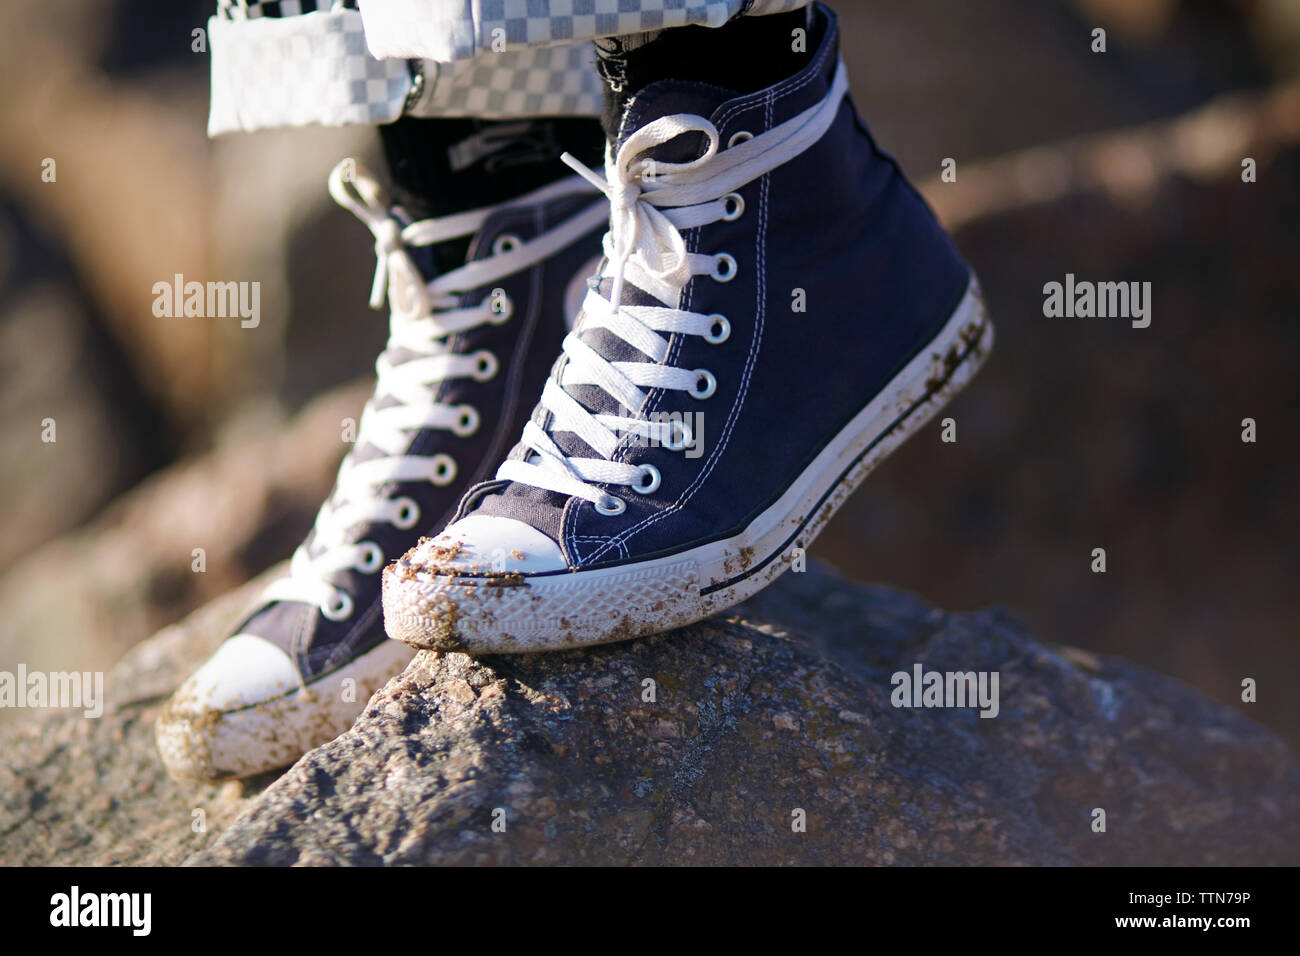 Legs, which are wearing plaid pants and blue sports dirty sneakers with white laces, standing on a rock. Stock Photo